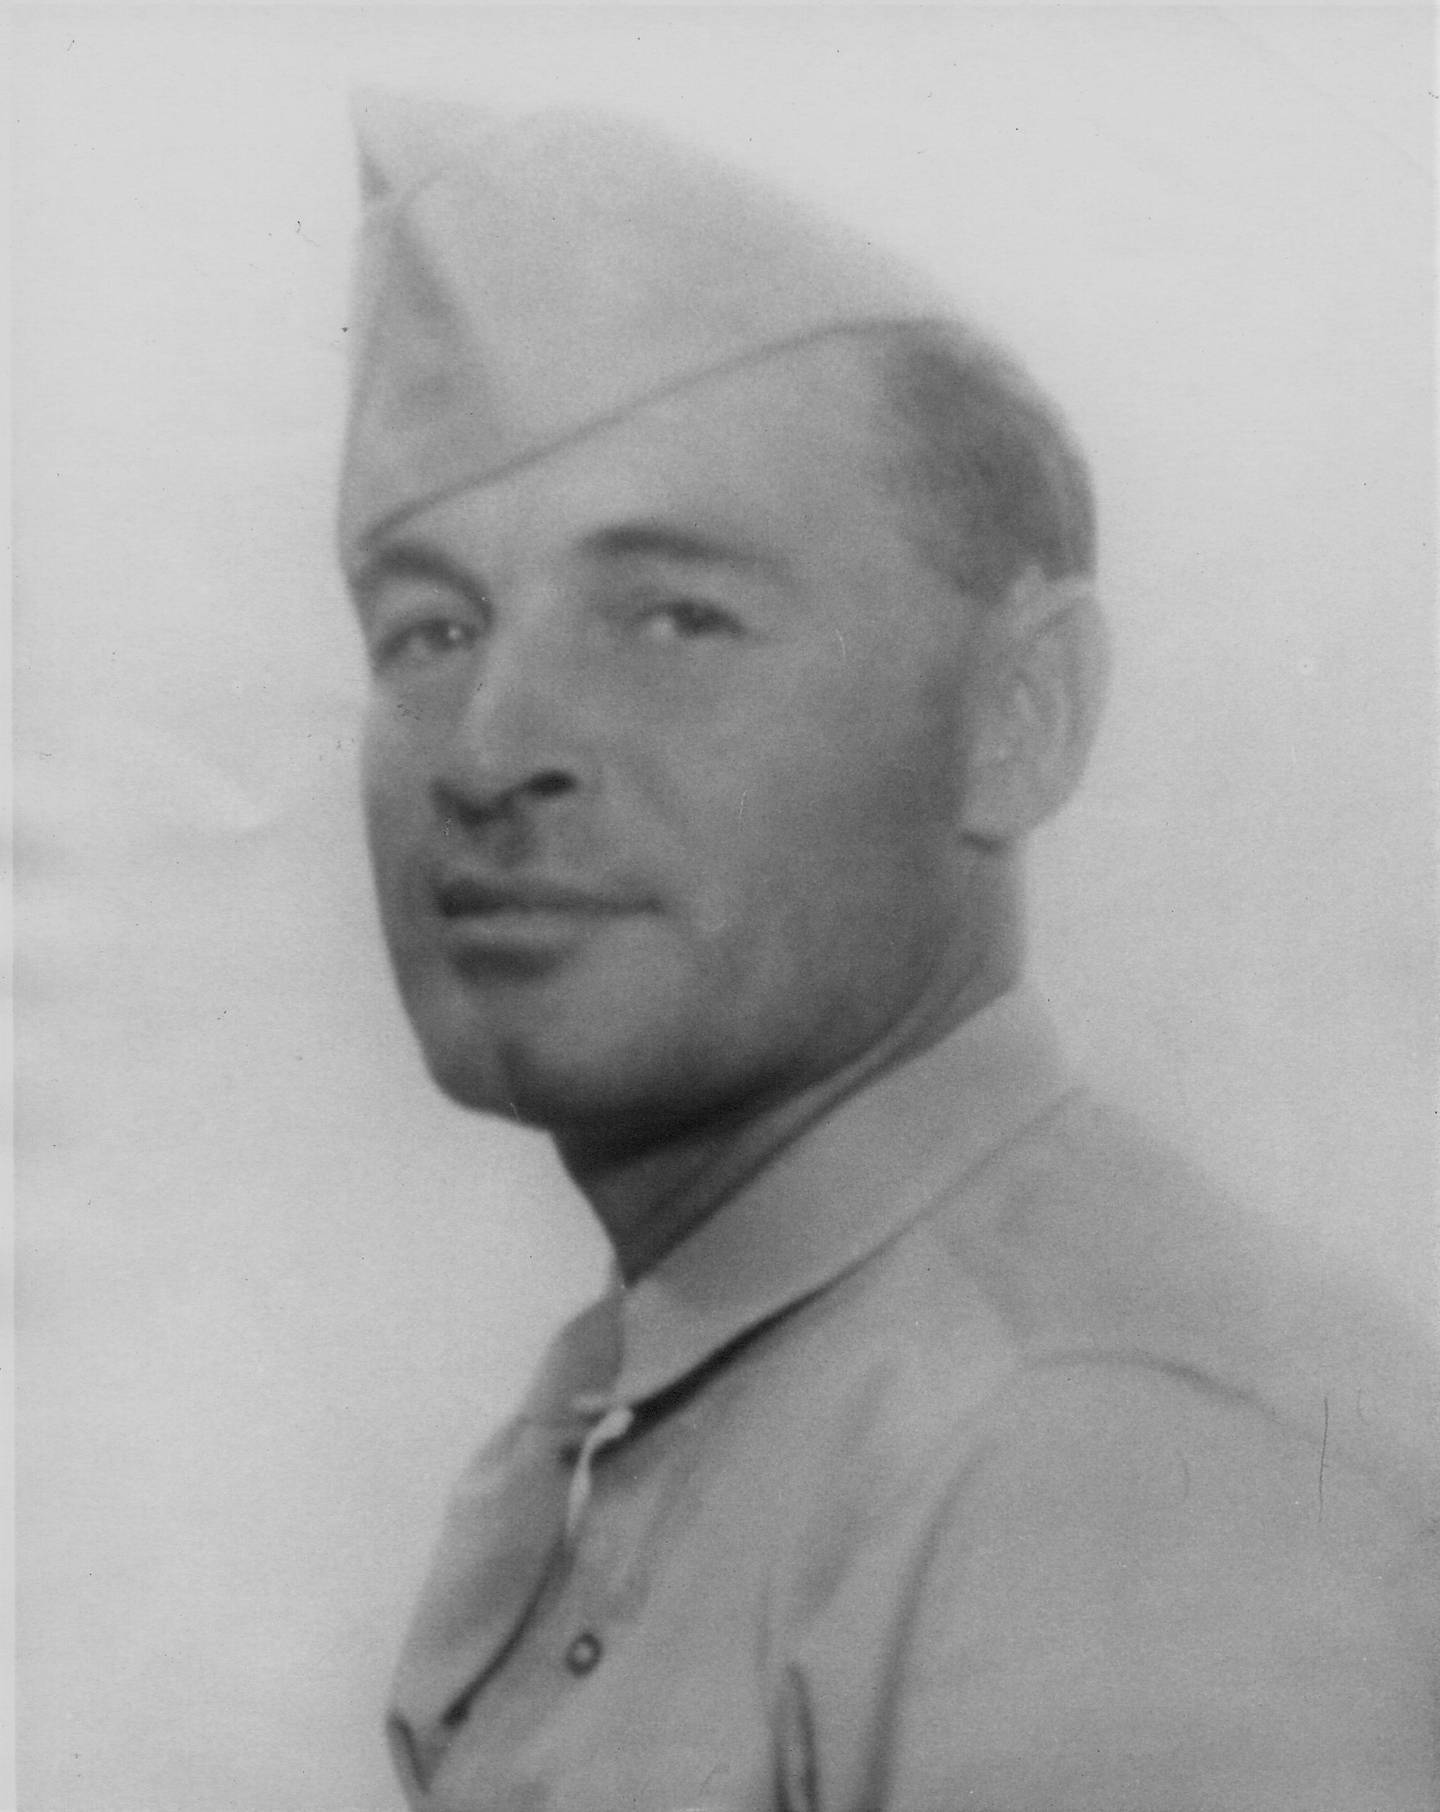 Arthur Countryman, a World War veteran from Plainfield, was reported killed in action on Nov. 20, 1944, his obituary said. He was just 37 years old. He was finally laid to rest next to his wife Loretta Countryman on Friday, August 6, 2021, at Plainfield Township Cemetery, Plainfield.